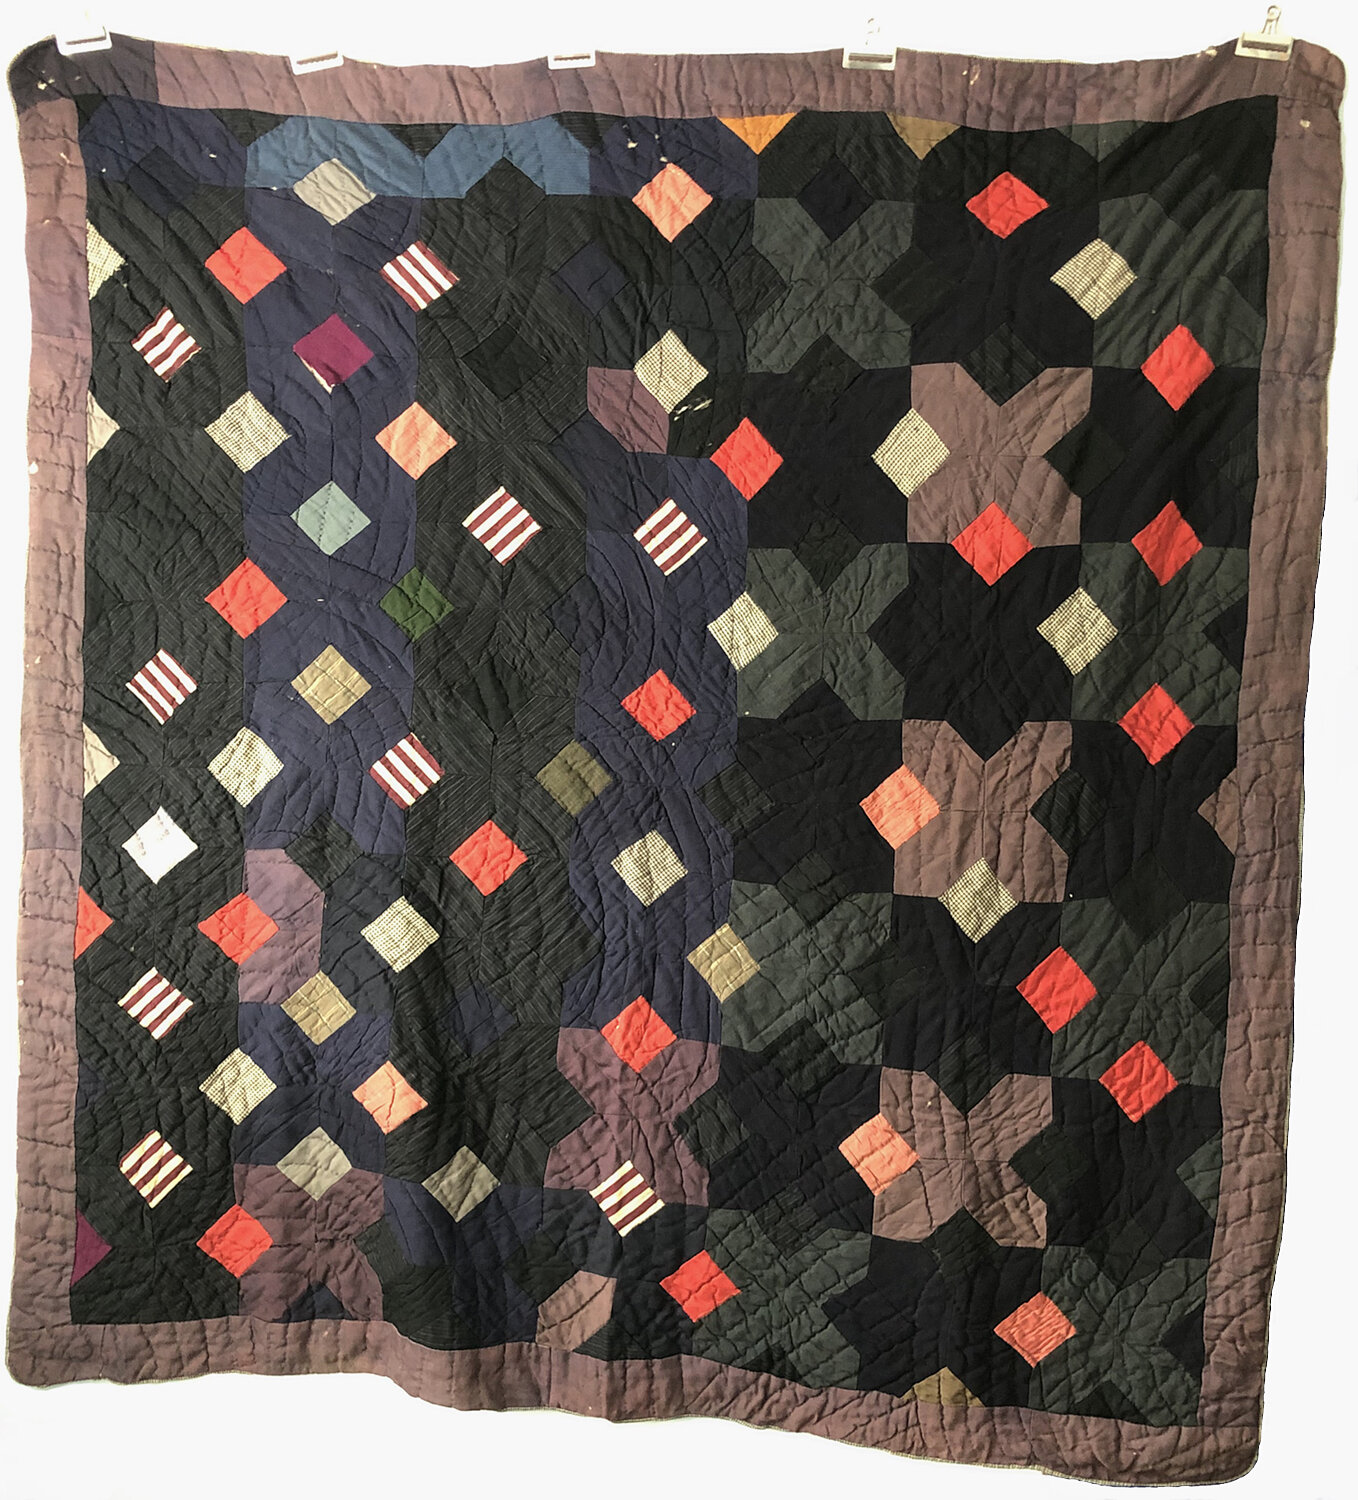   BLOCK/DIAMOND VARIATION Quilt   unknown maker, ca. 1940s; found in Nashville, TN  78" x 75"  cottons, suit fabrics  hand-pieced, hand-quilted; raw cotton batting    ASK ABOUT THIS QUILT   